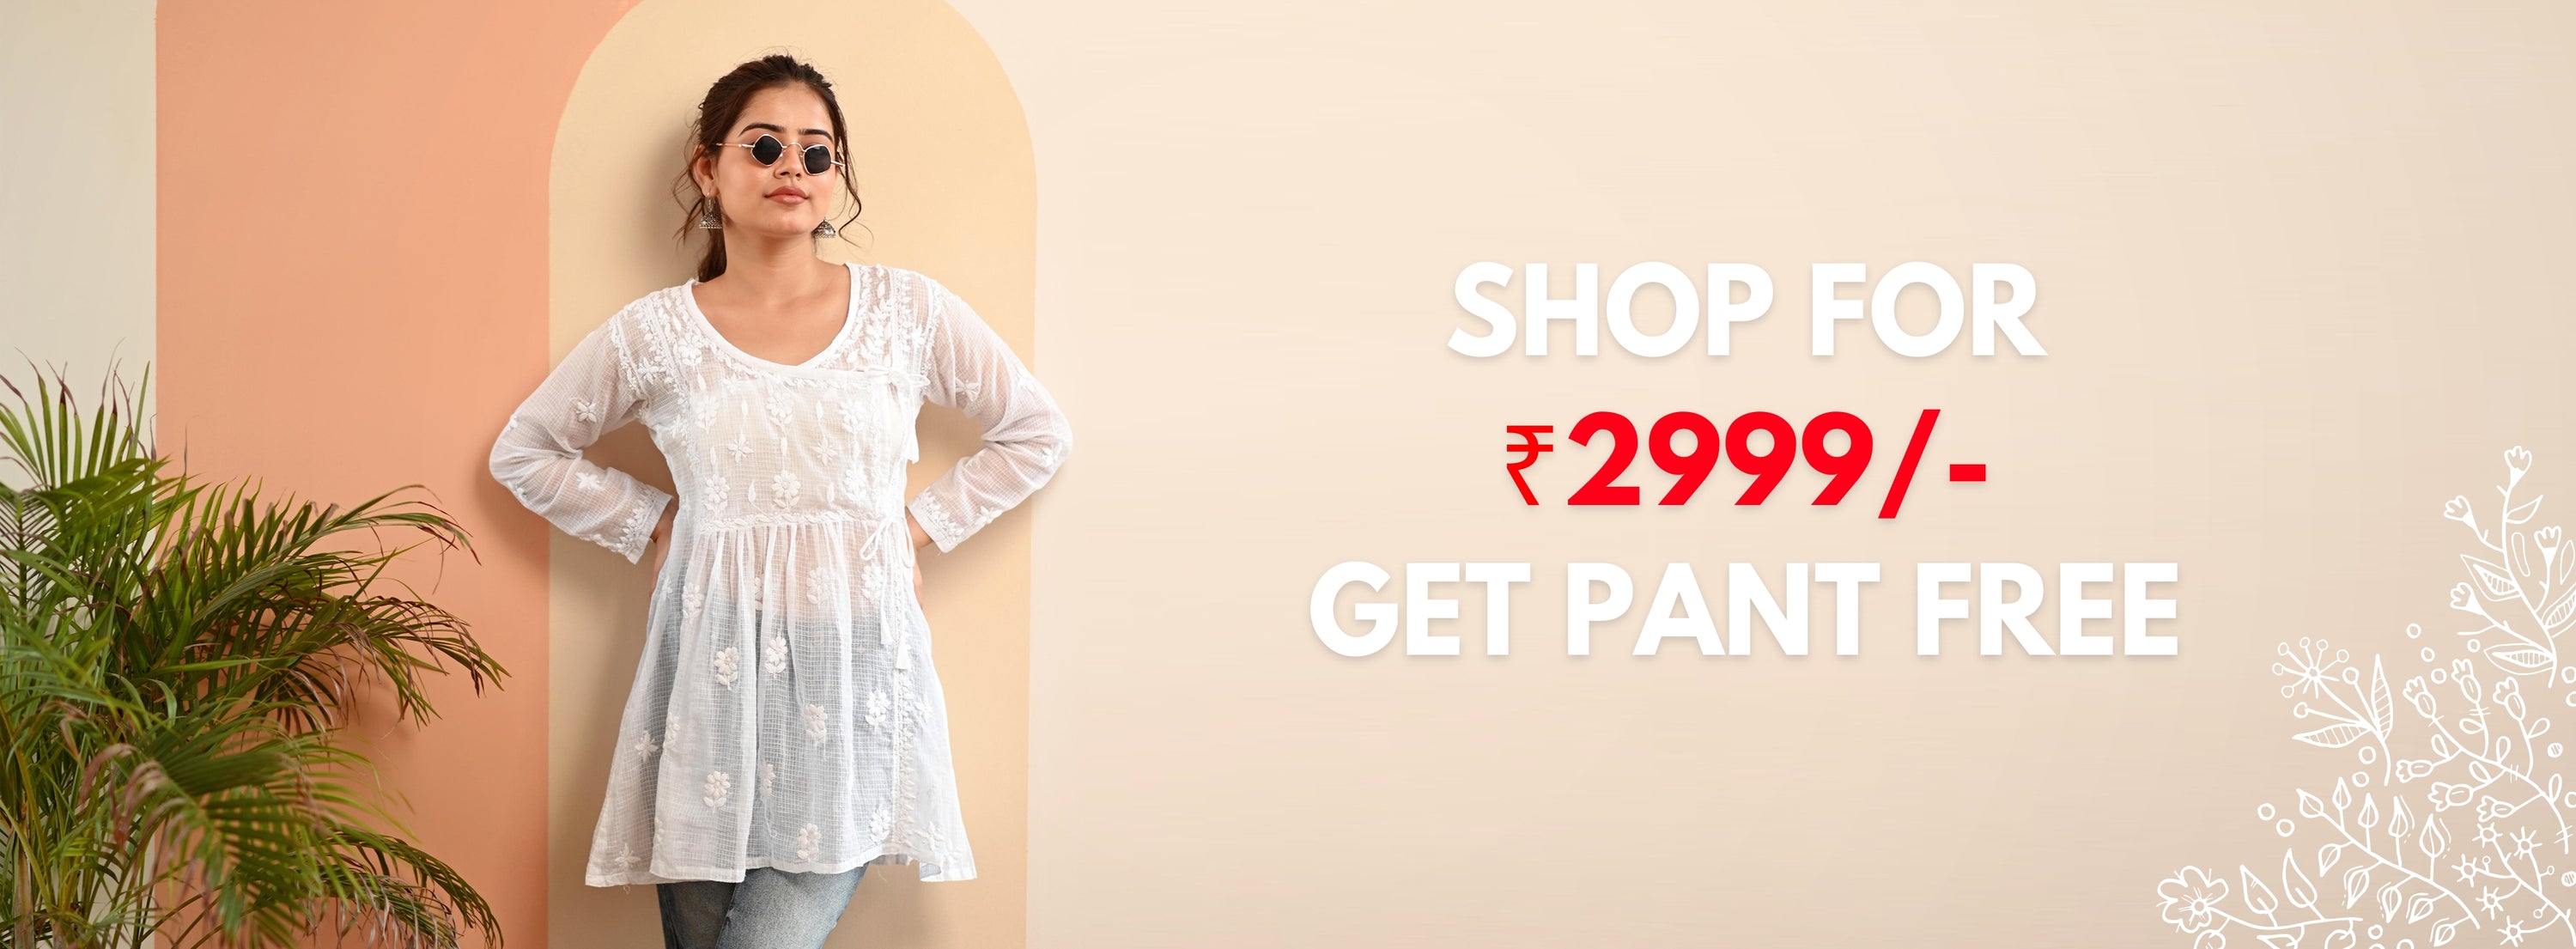 Buy for 2999, Get Pant Free